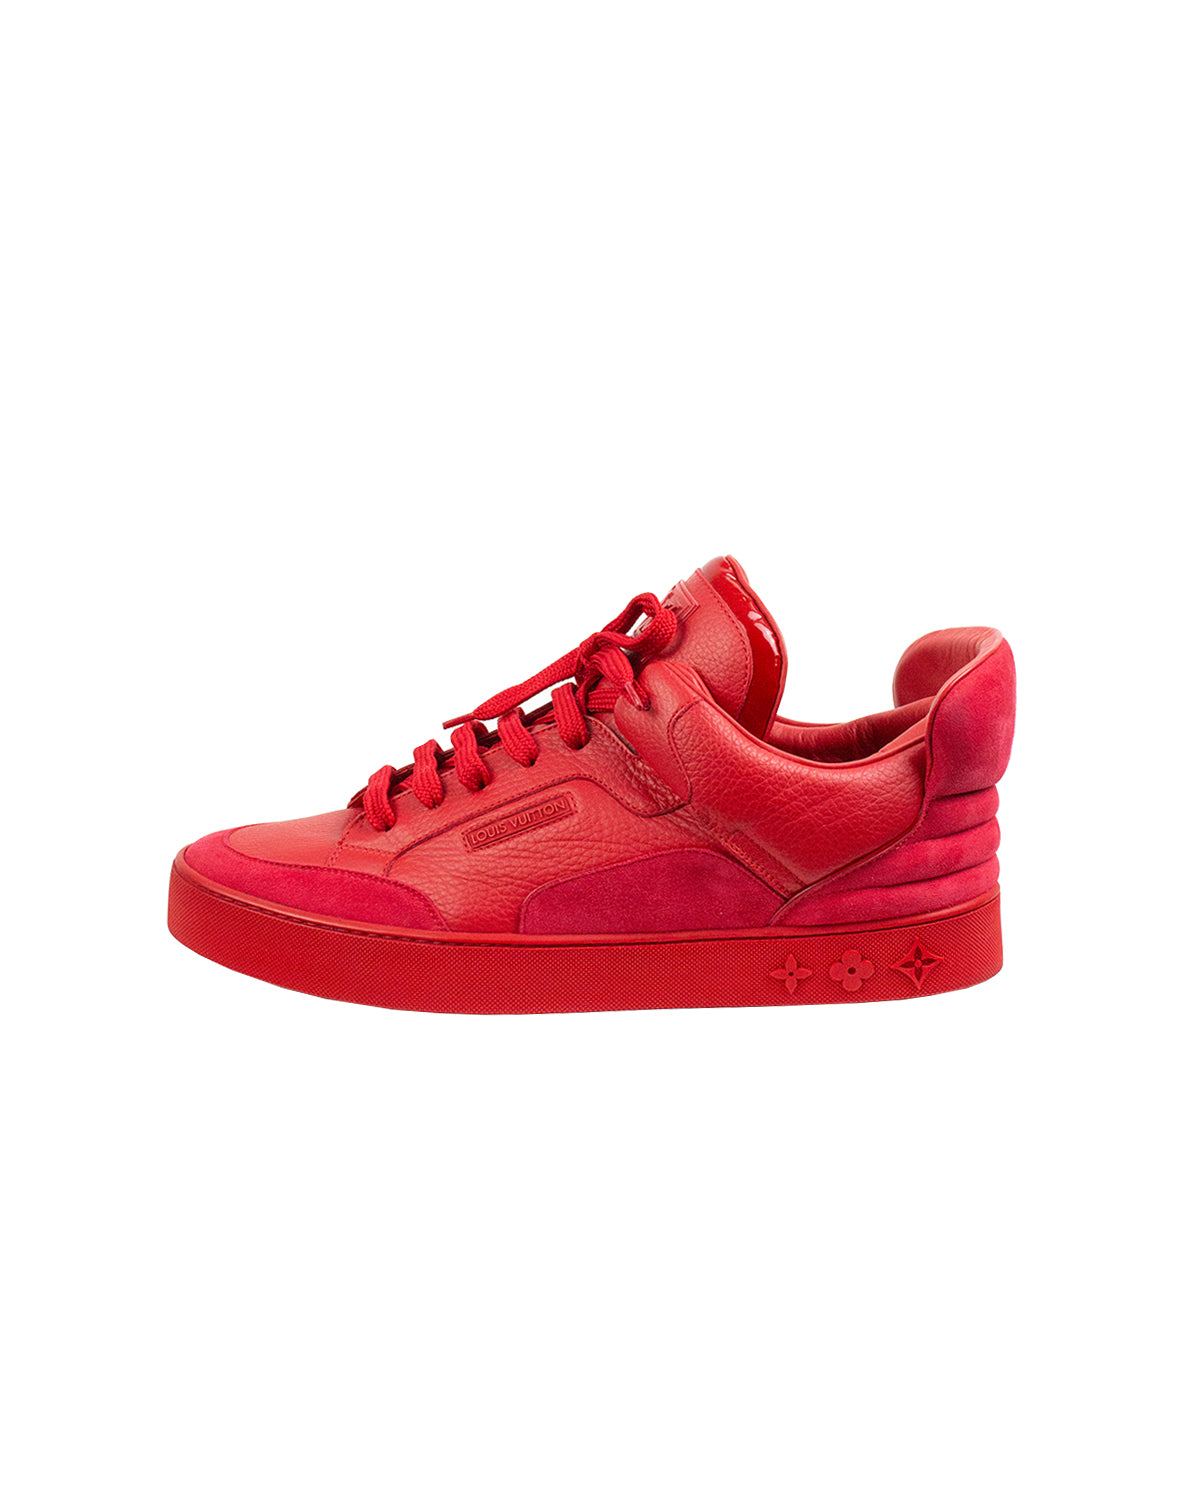 LIMITED EDITION & BRAND NEW Kanye West x Louis Vuitton Don 'Red